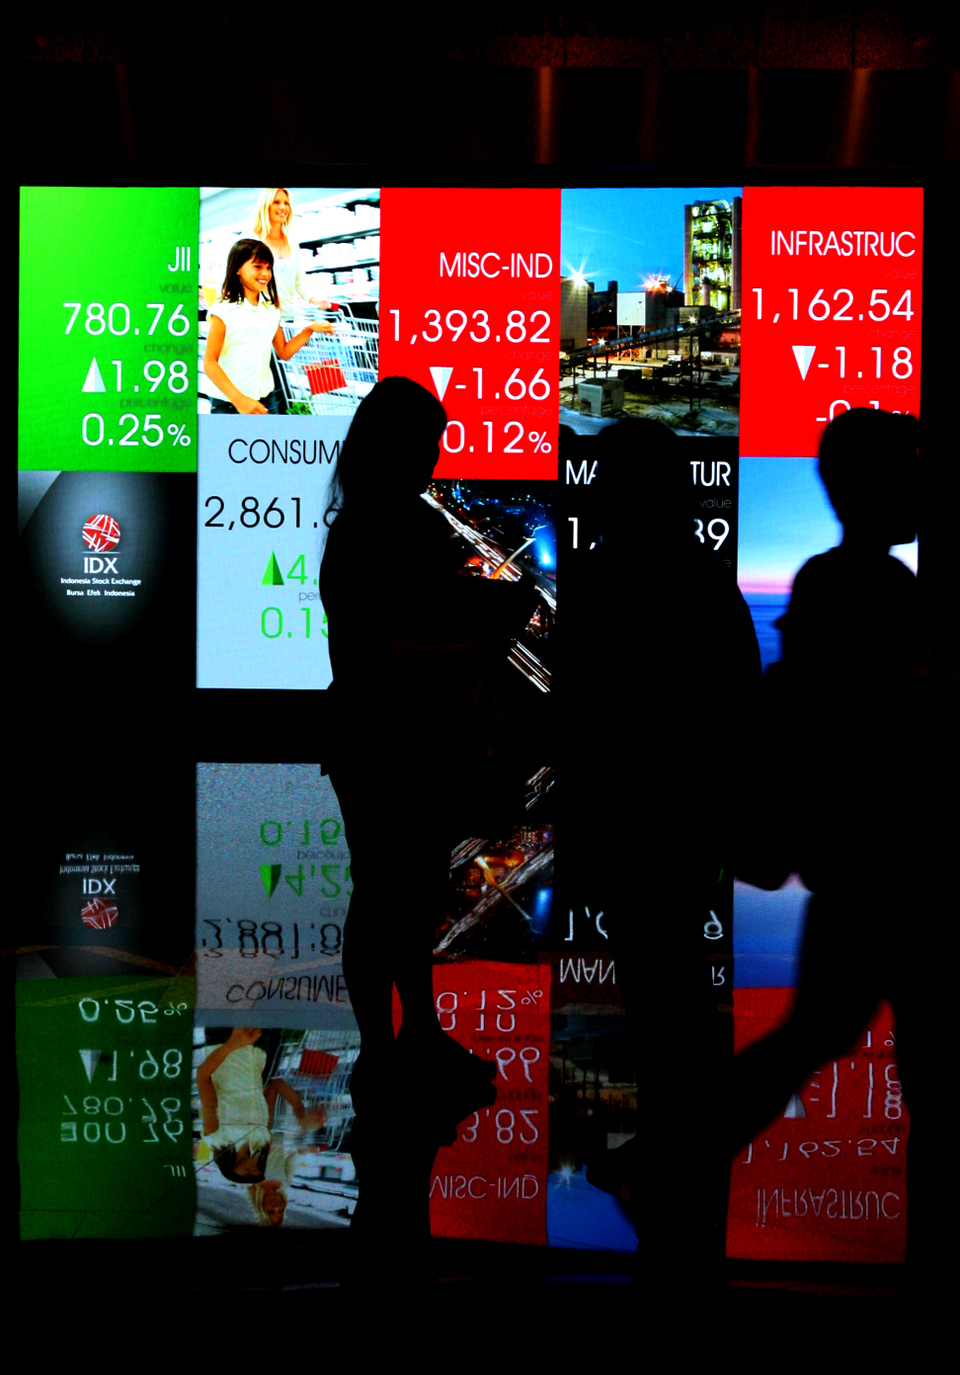 Most Southeast Asian stock markets fell on Thursday (26/04), while Indonesia slipped for a fifth straight session to levels unseen since October. (B1 Photo/Mohammad Defrizal)